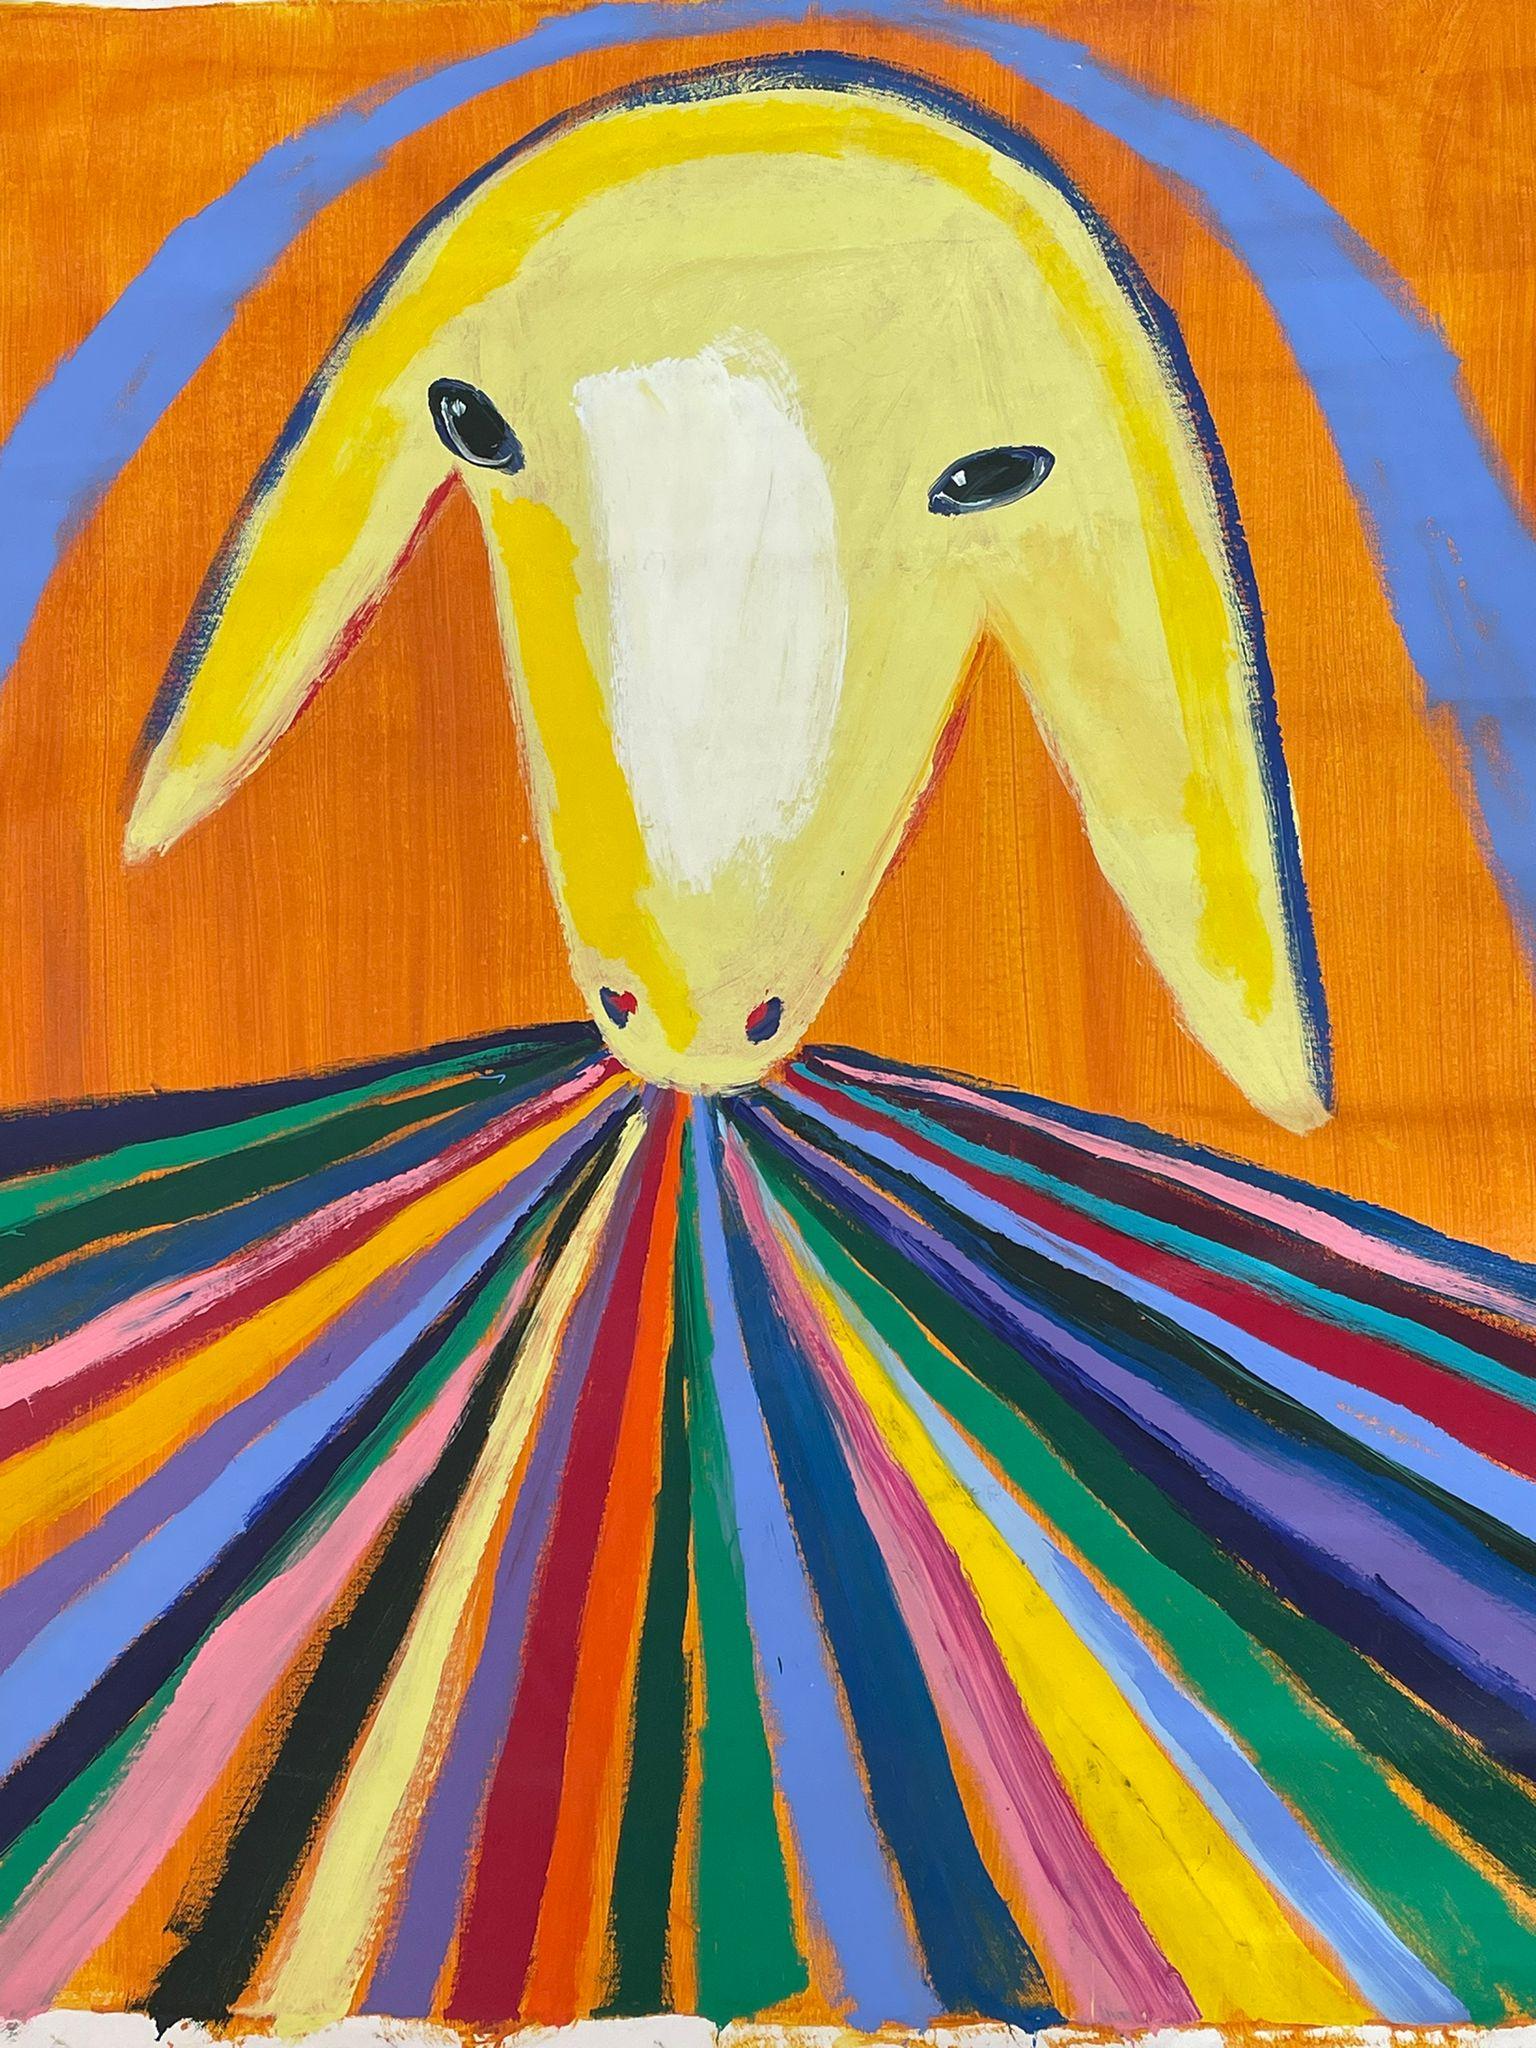 A beautiful Menashe Kadishman painting made with the artist's signature style and technique.
The painting depicts a colorful and special sheep with a rainbow underneath.
creating a colorful and enchanting scene.